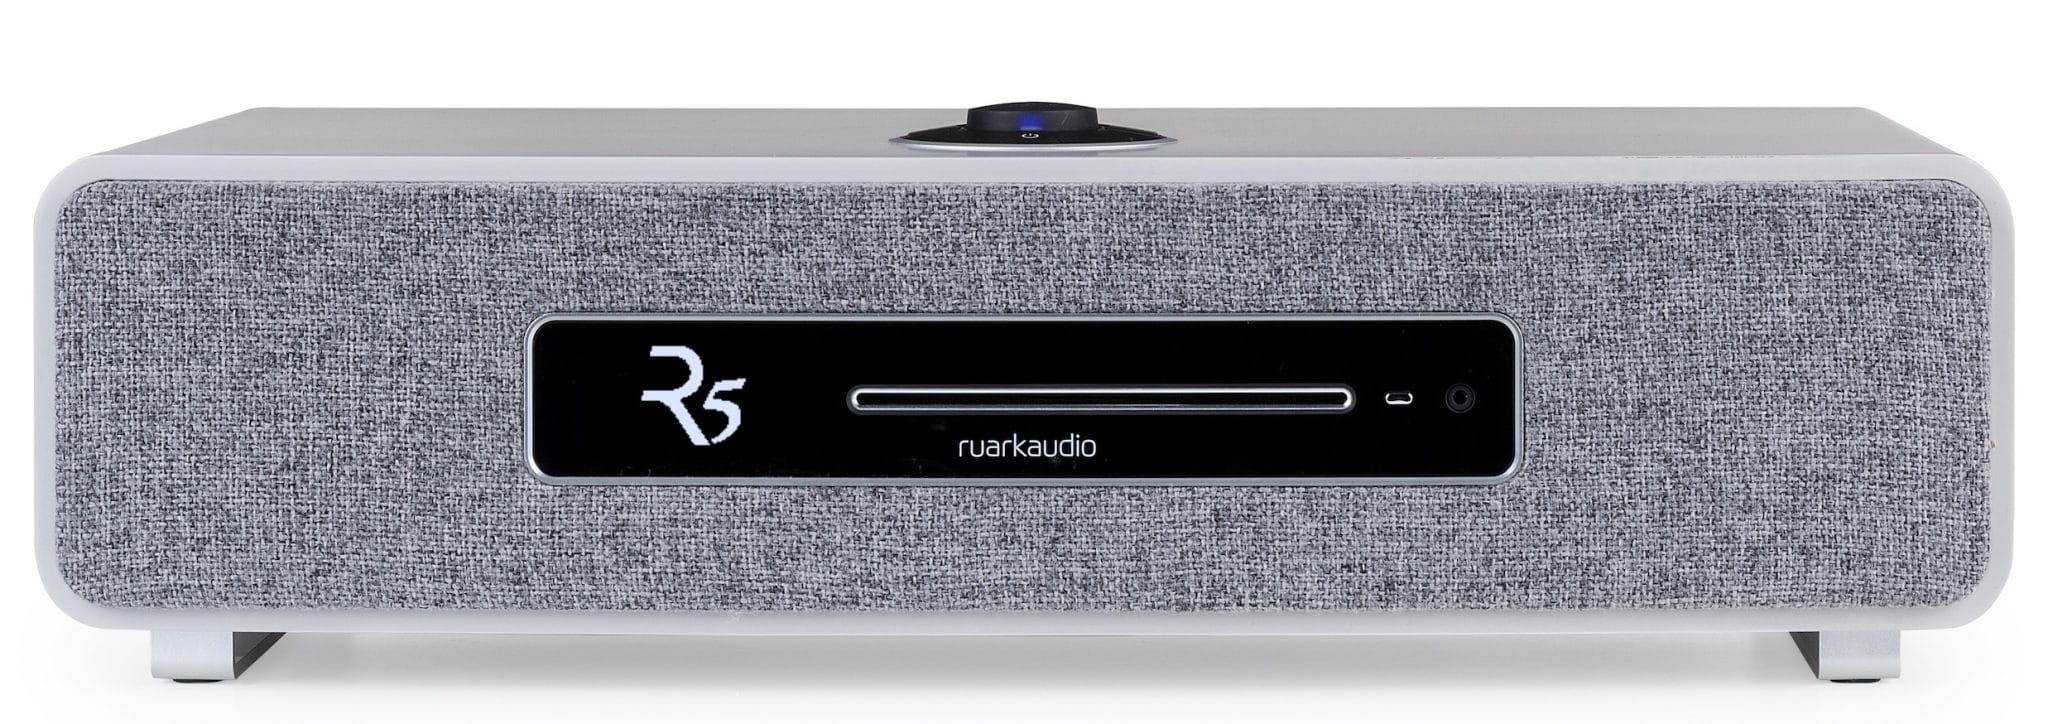 R5 Music System From Ruark